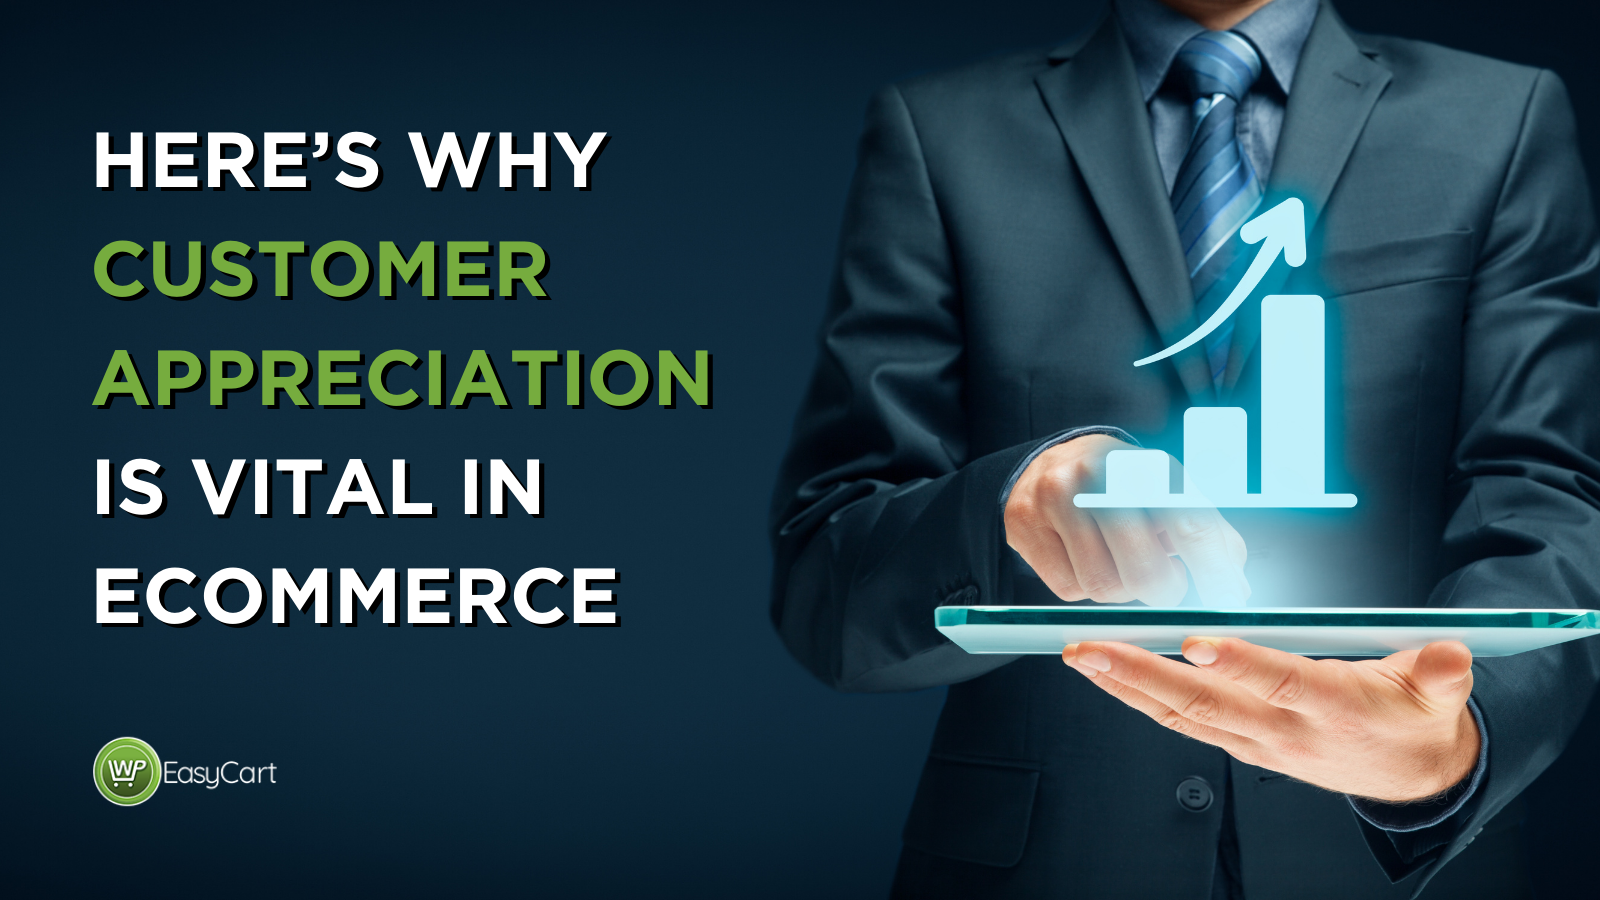 Here's Why Customer Appreciation is Vital in eCommerce